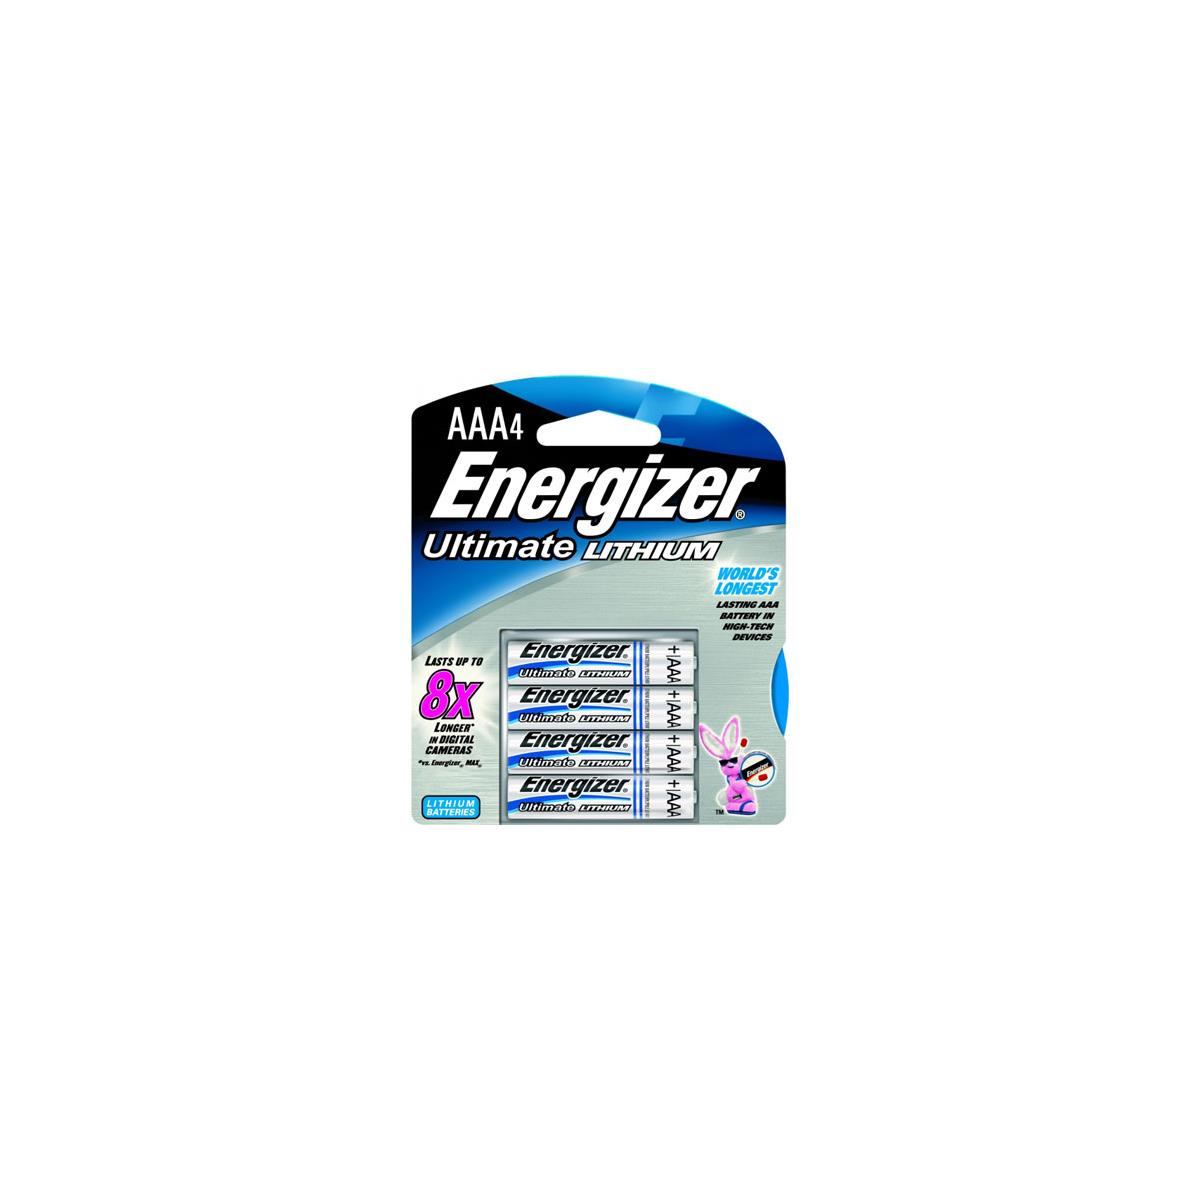 

Energizer AAA 1.5V Ultimate Lithium Battery, 4-Pack